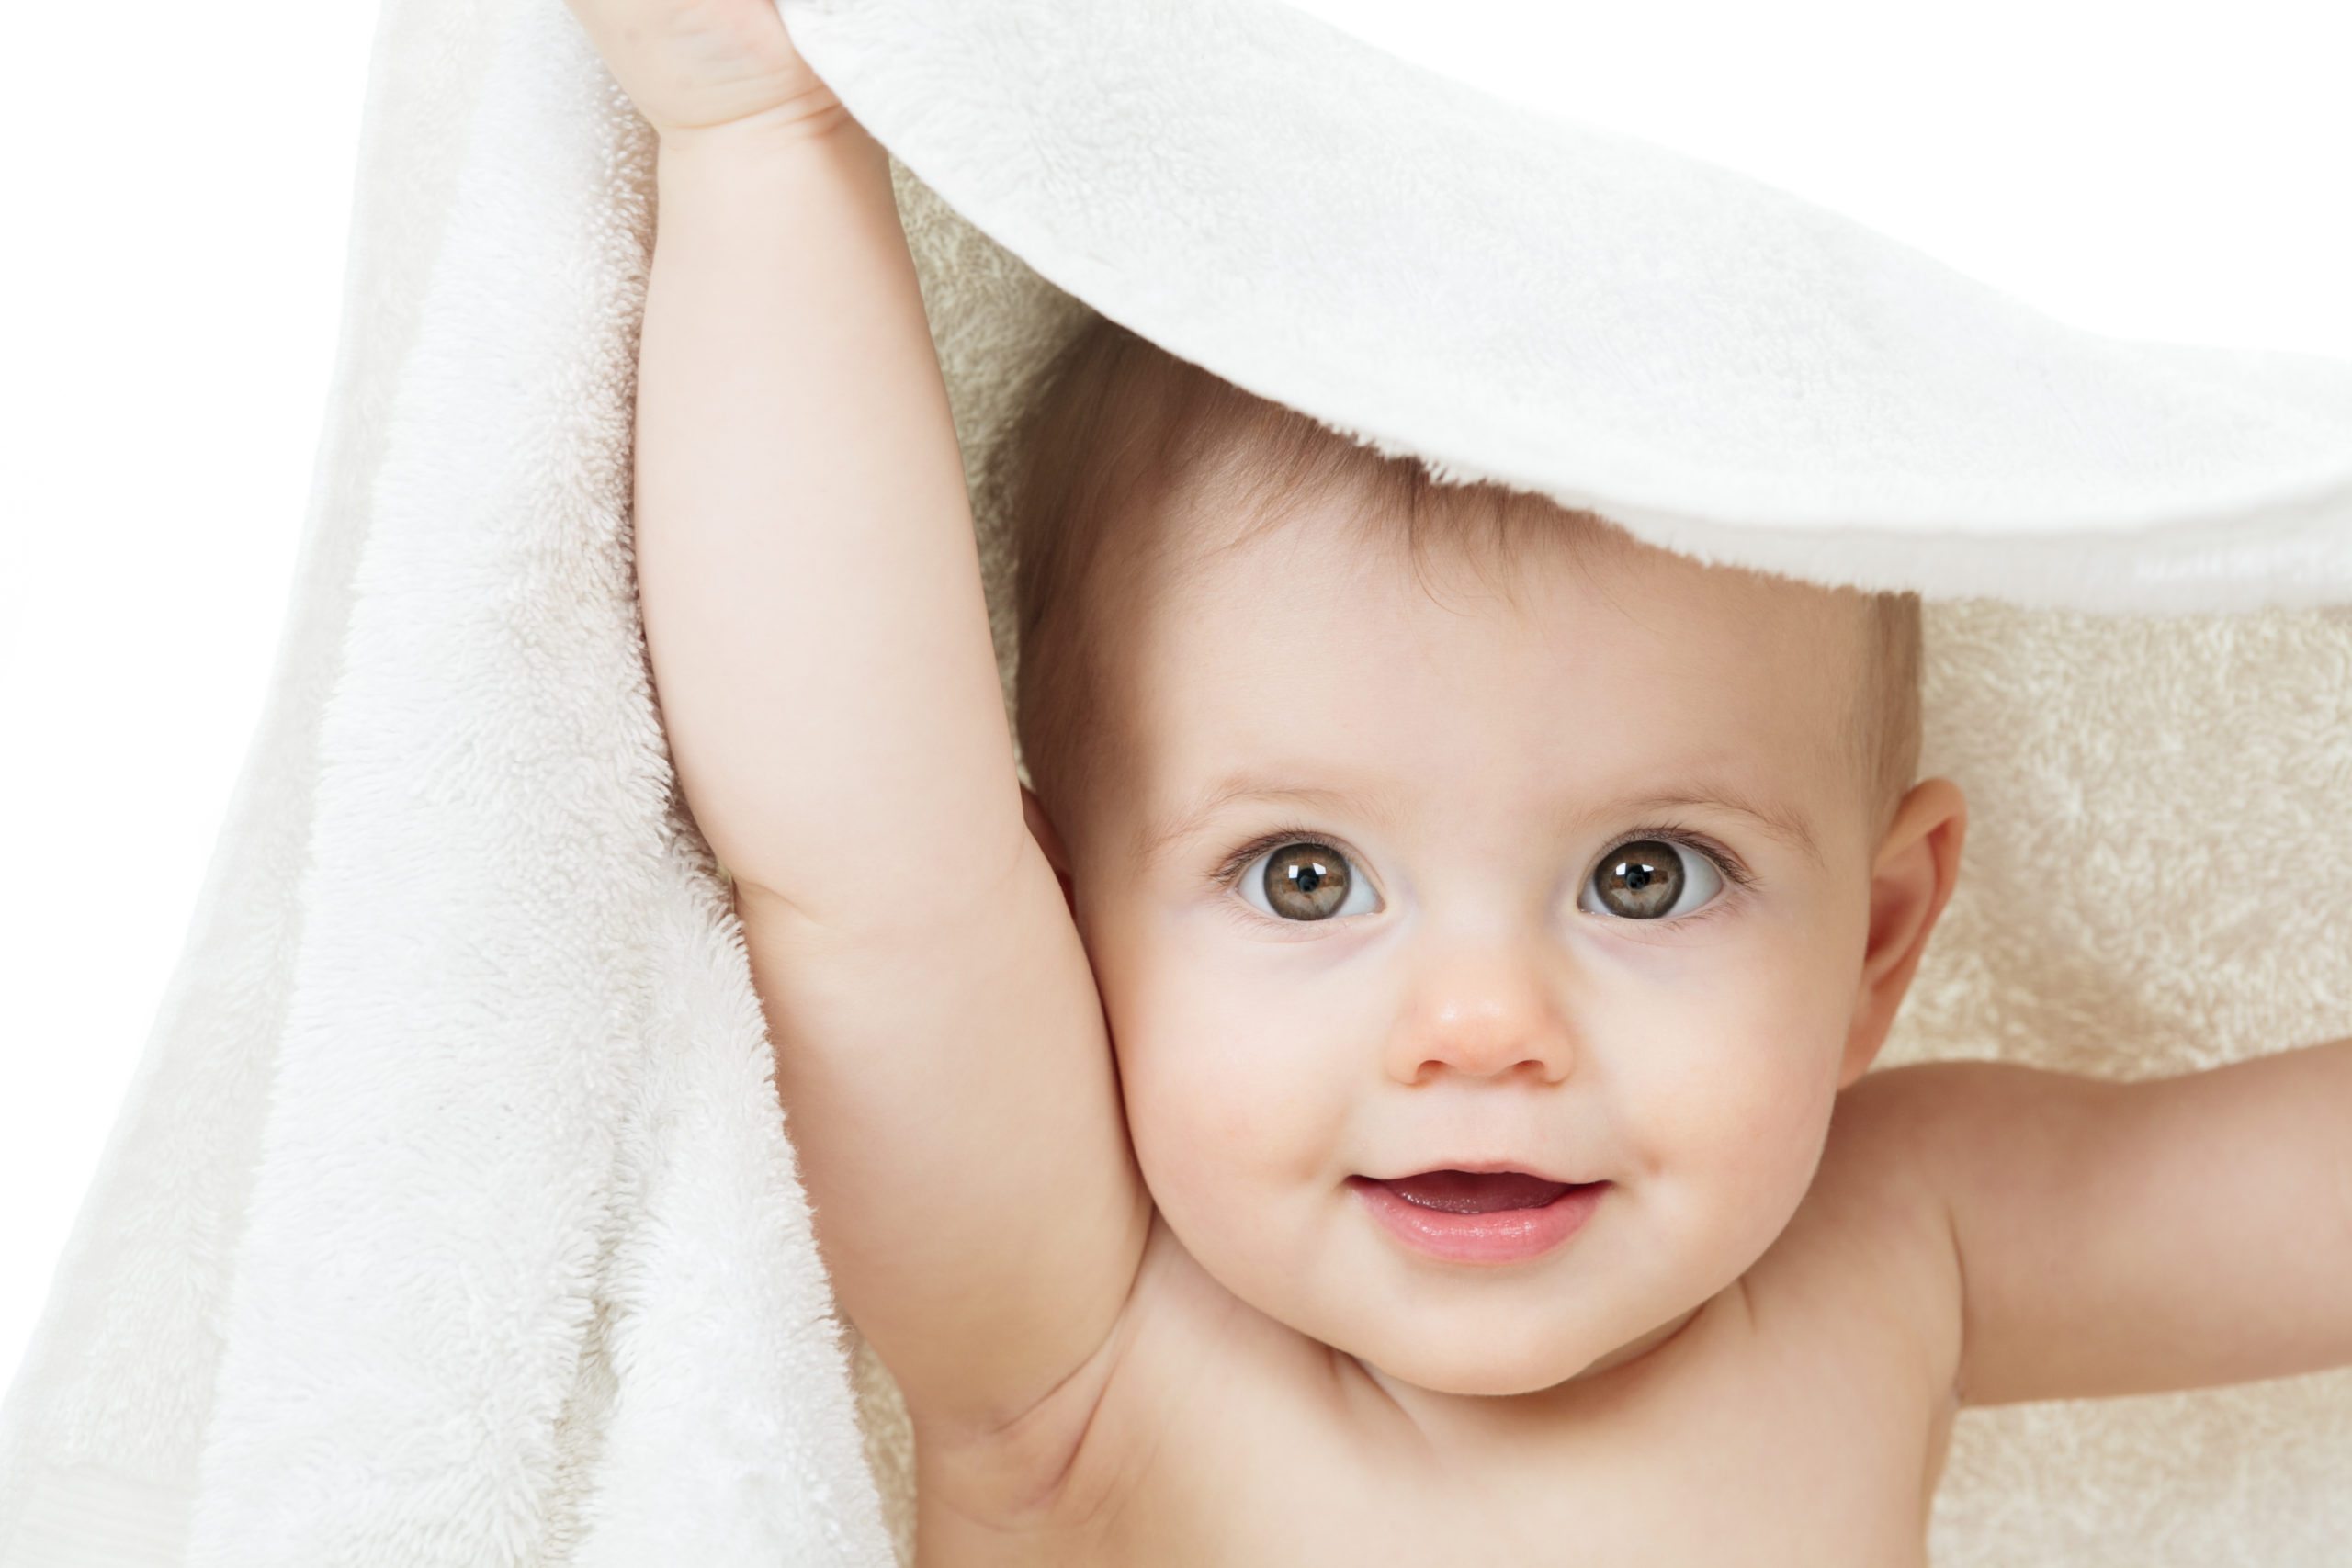 Nannies and mommies home page picture of baby holding up towel